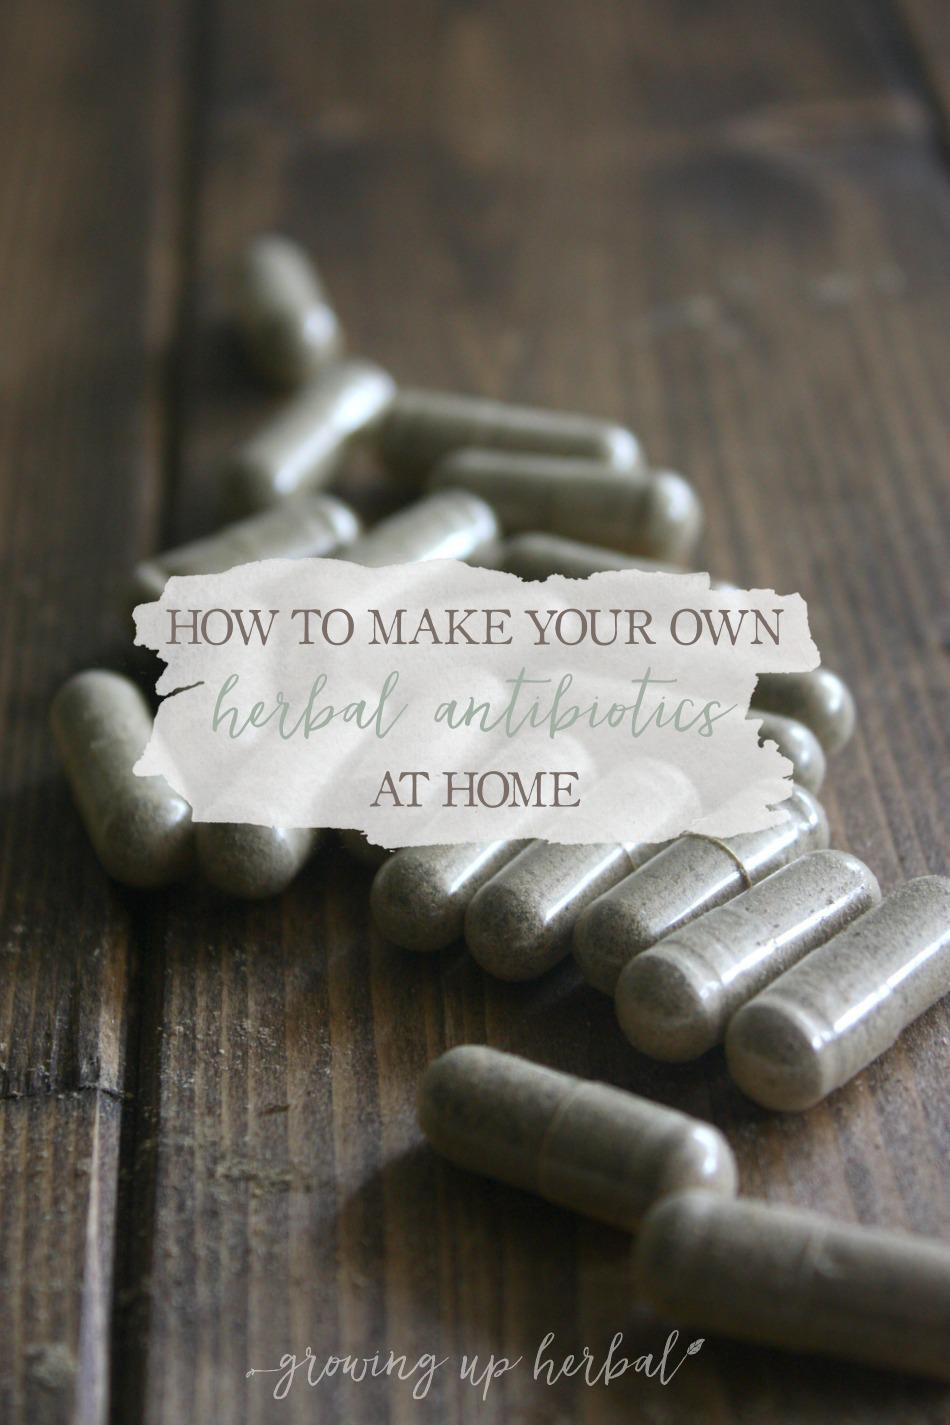 How To Make Your Own Herbal Antibiotics At Home | Growing Up Herbal | Want to learn how to make your own "herbal antibiotics" at home using antimicrobial herbs? Here's how!